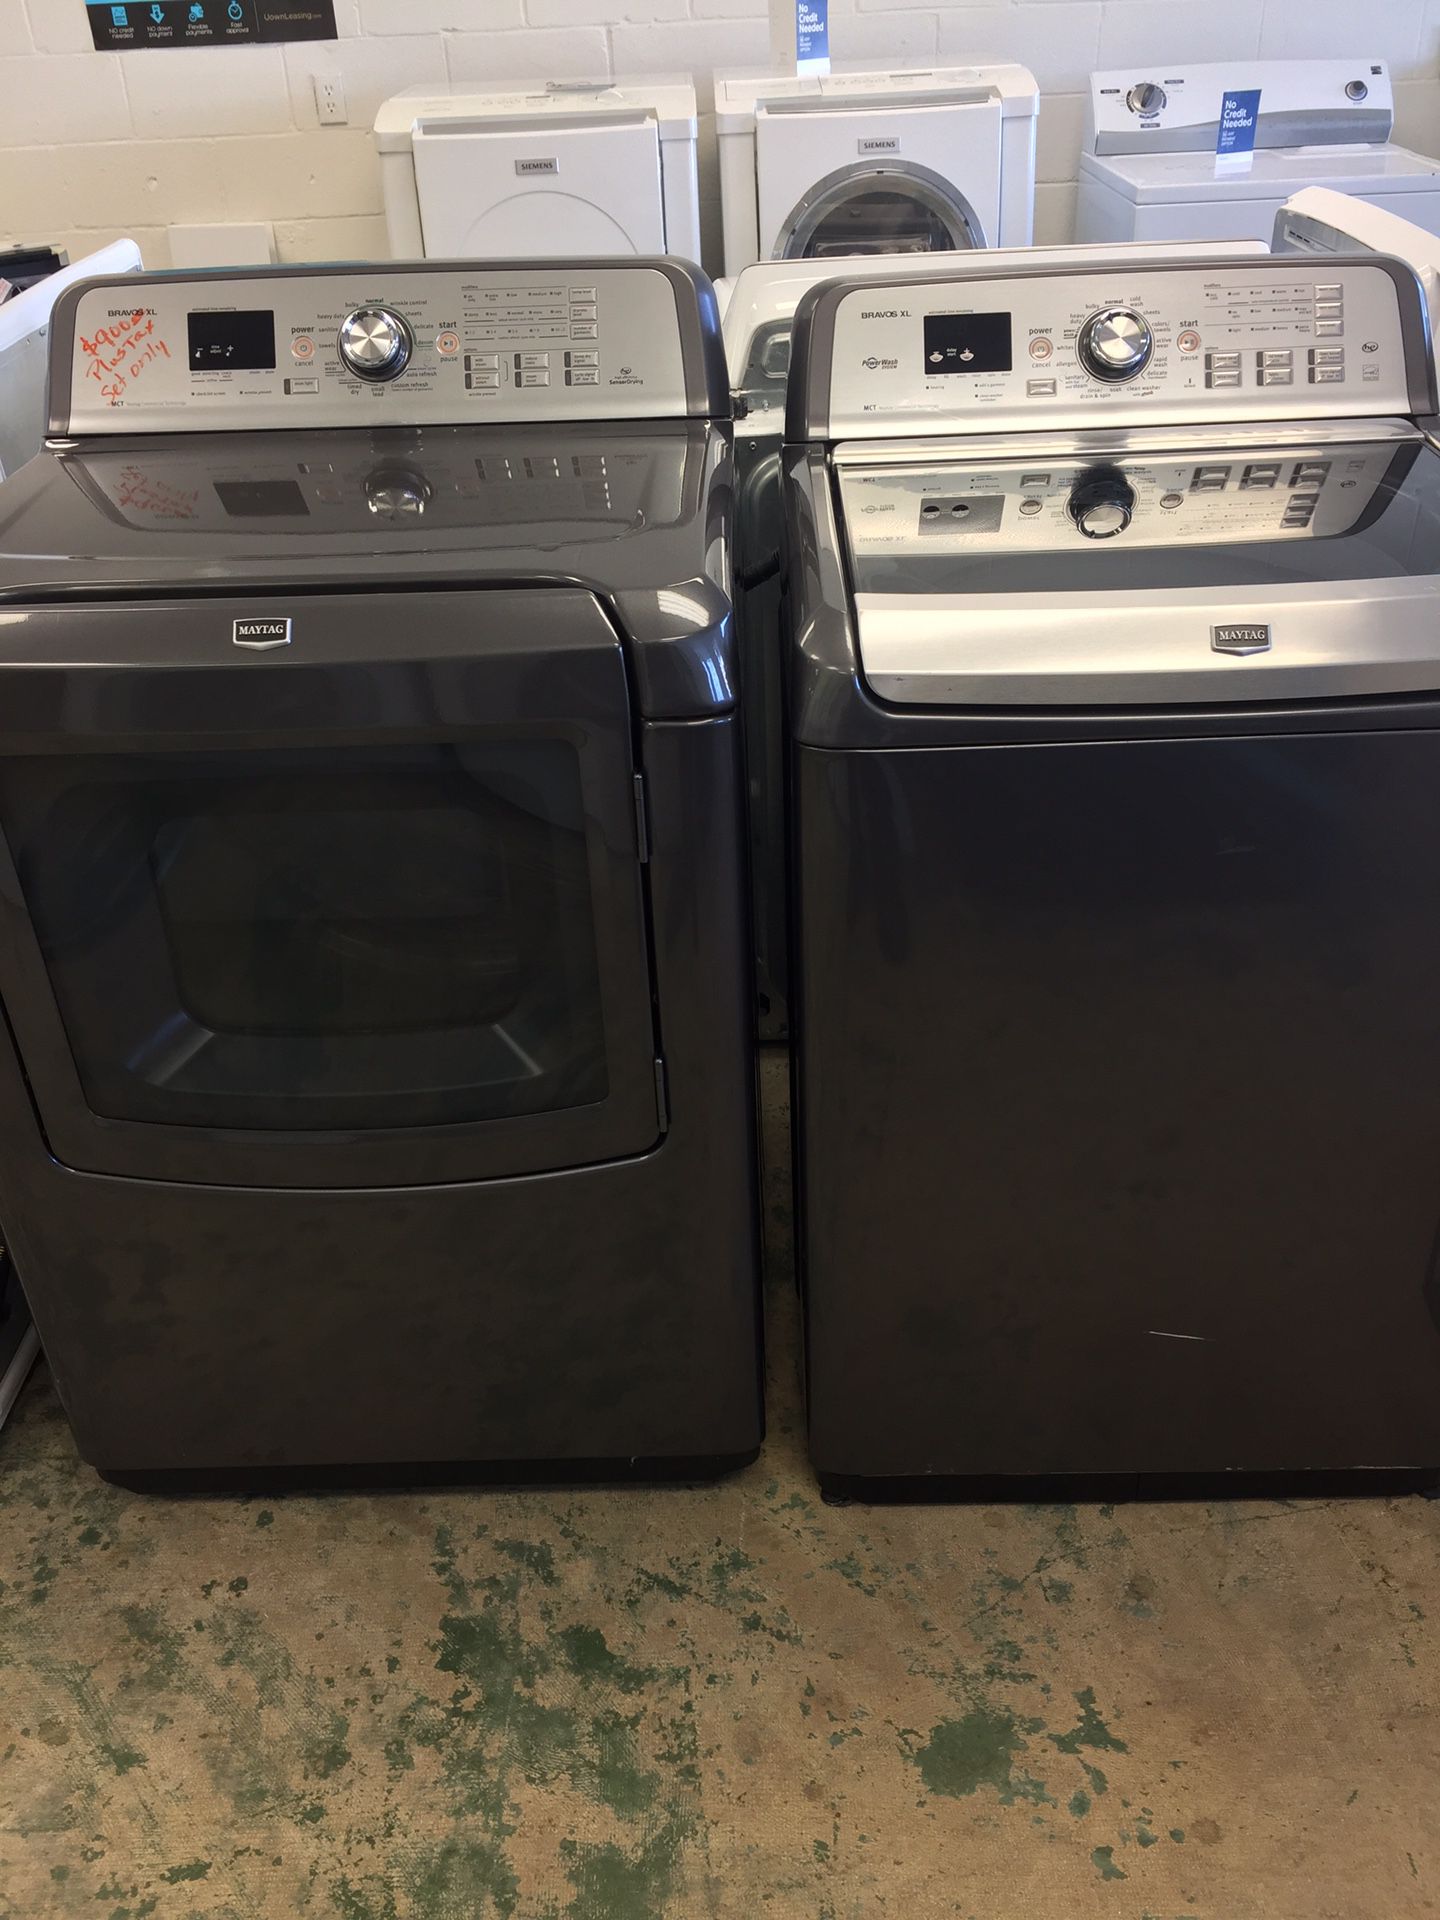 Used Appliances For Sale